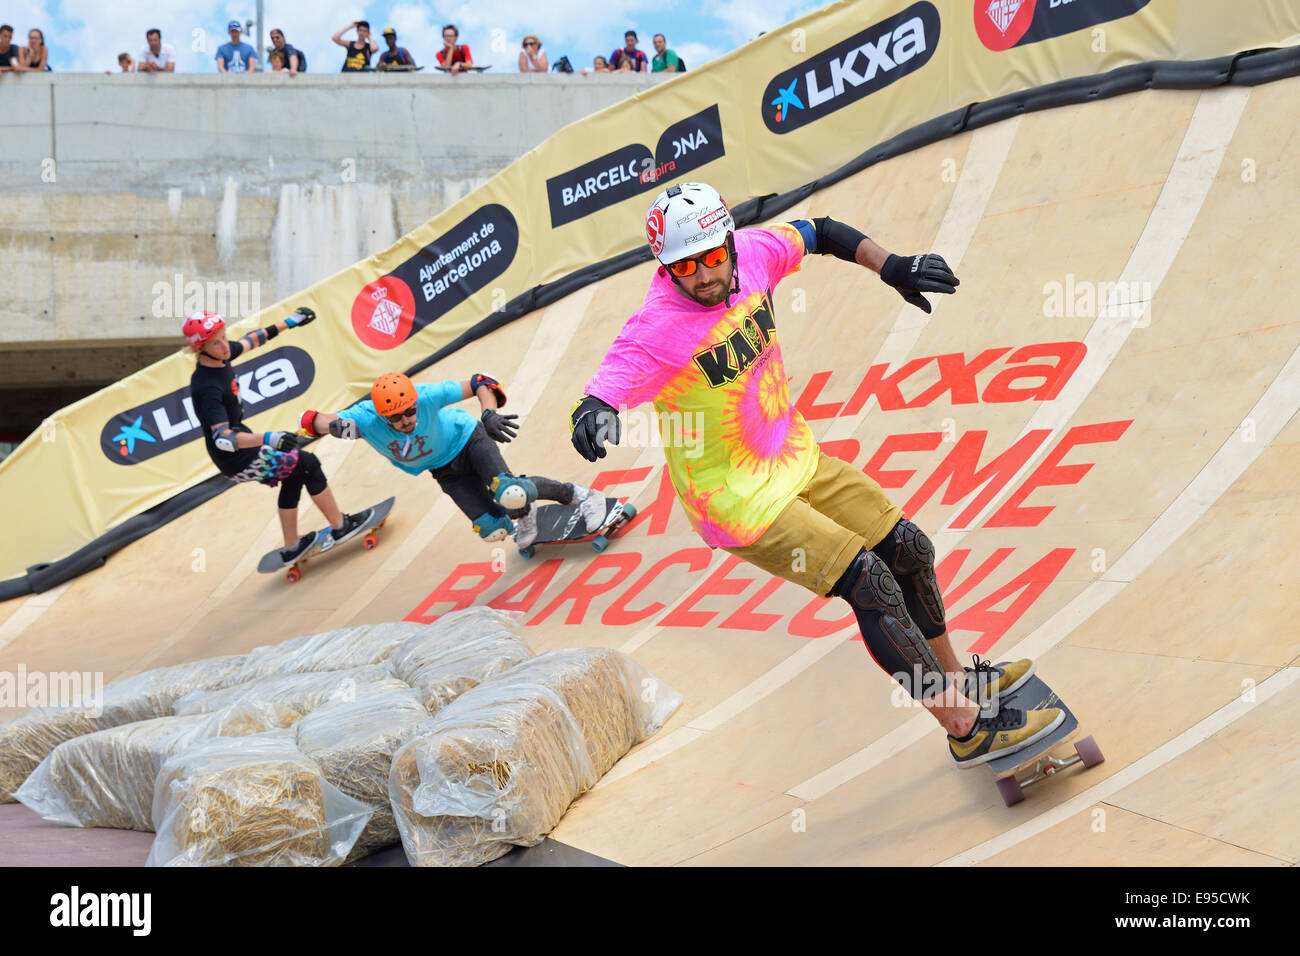 BARCELONA - JUN 28: Professional riders at the Longboard Cross competition at LKXA Extreme Sports Barcelona Games. Stock Photo